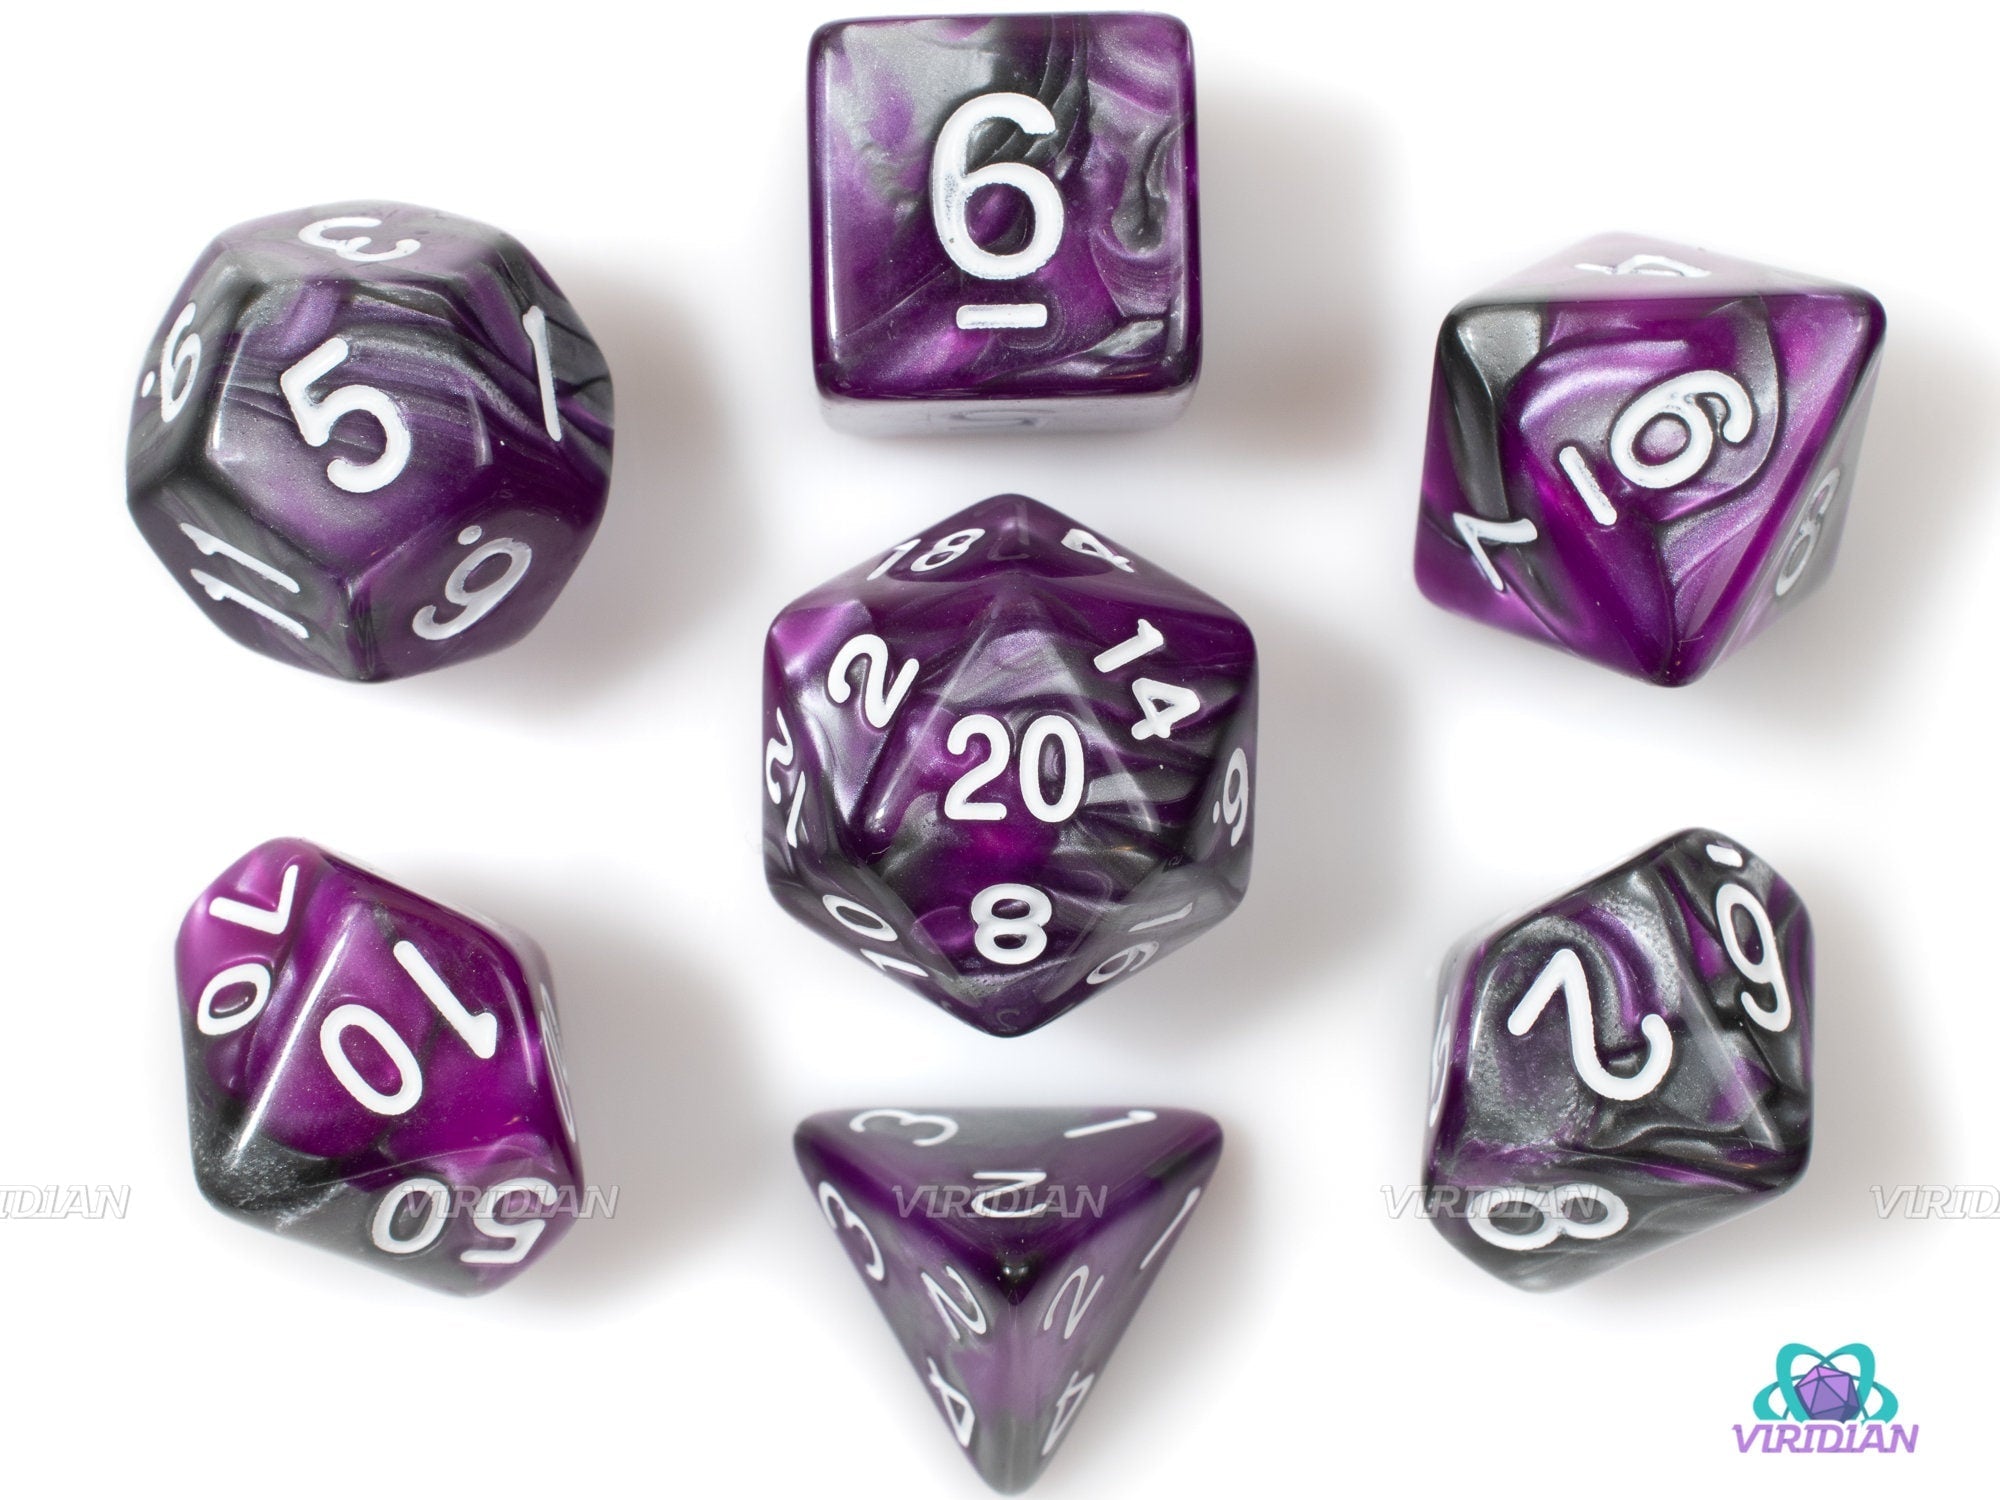 Drow Steel | Purple & Gray Swirled Acrylic Dice Set (7) | Dungeons and Dragons (DnD)